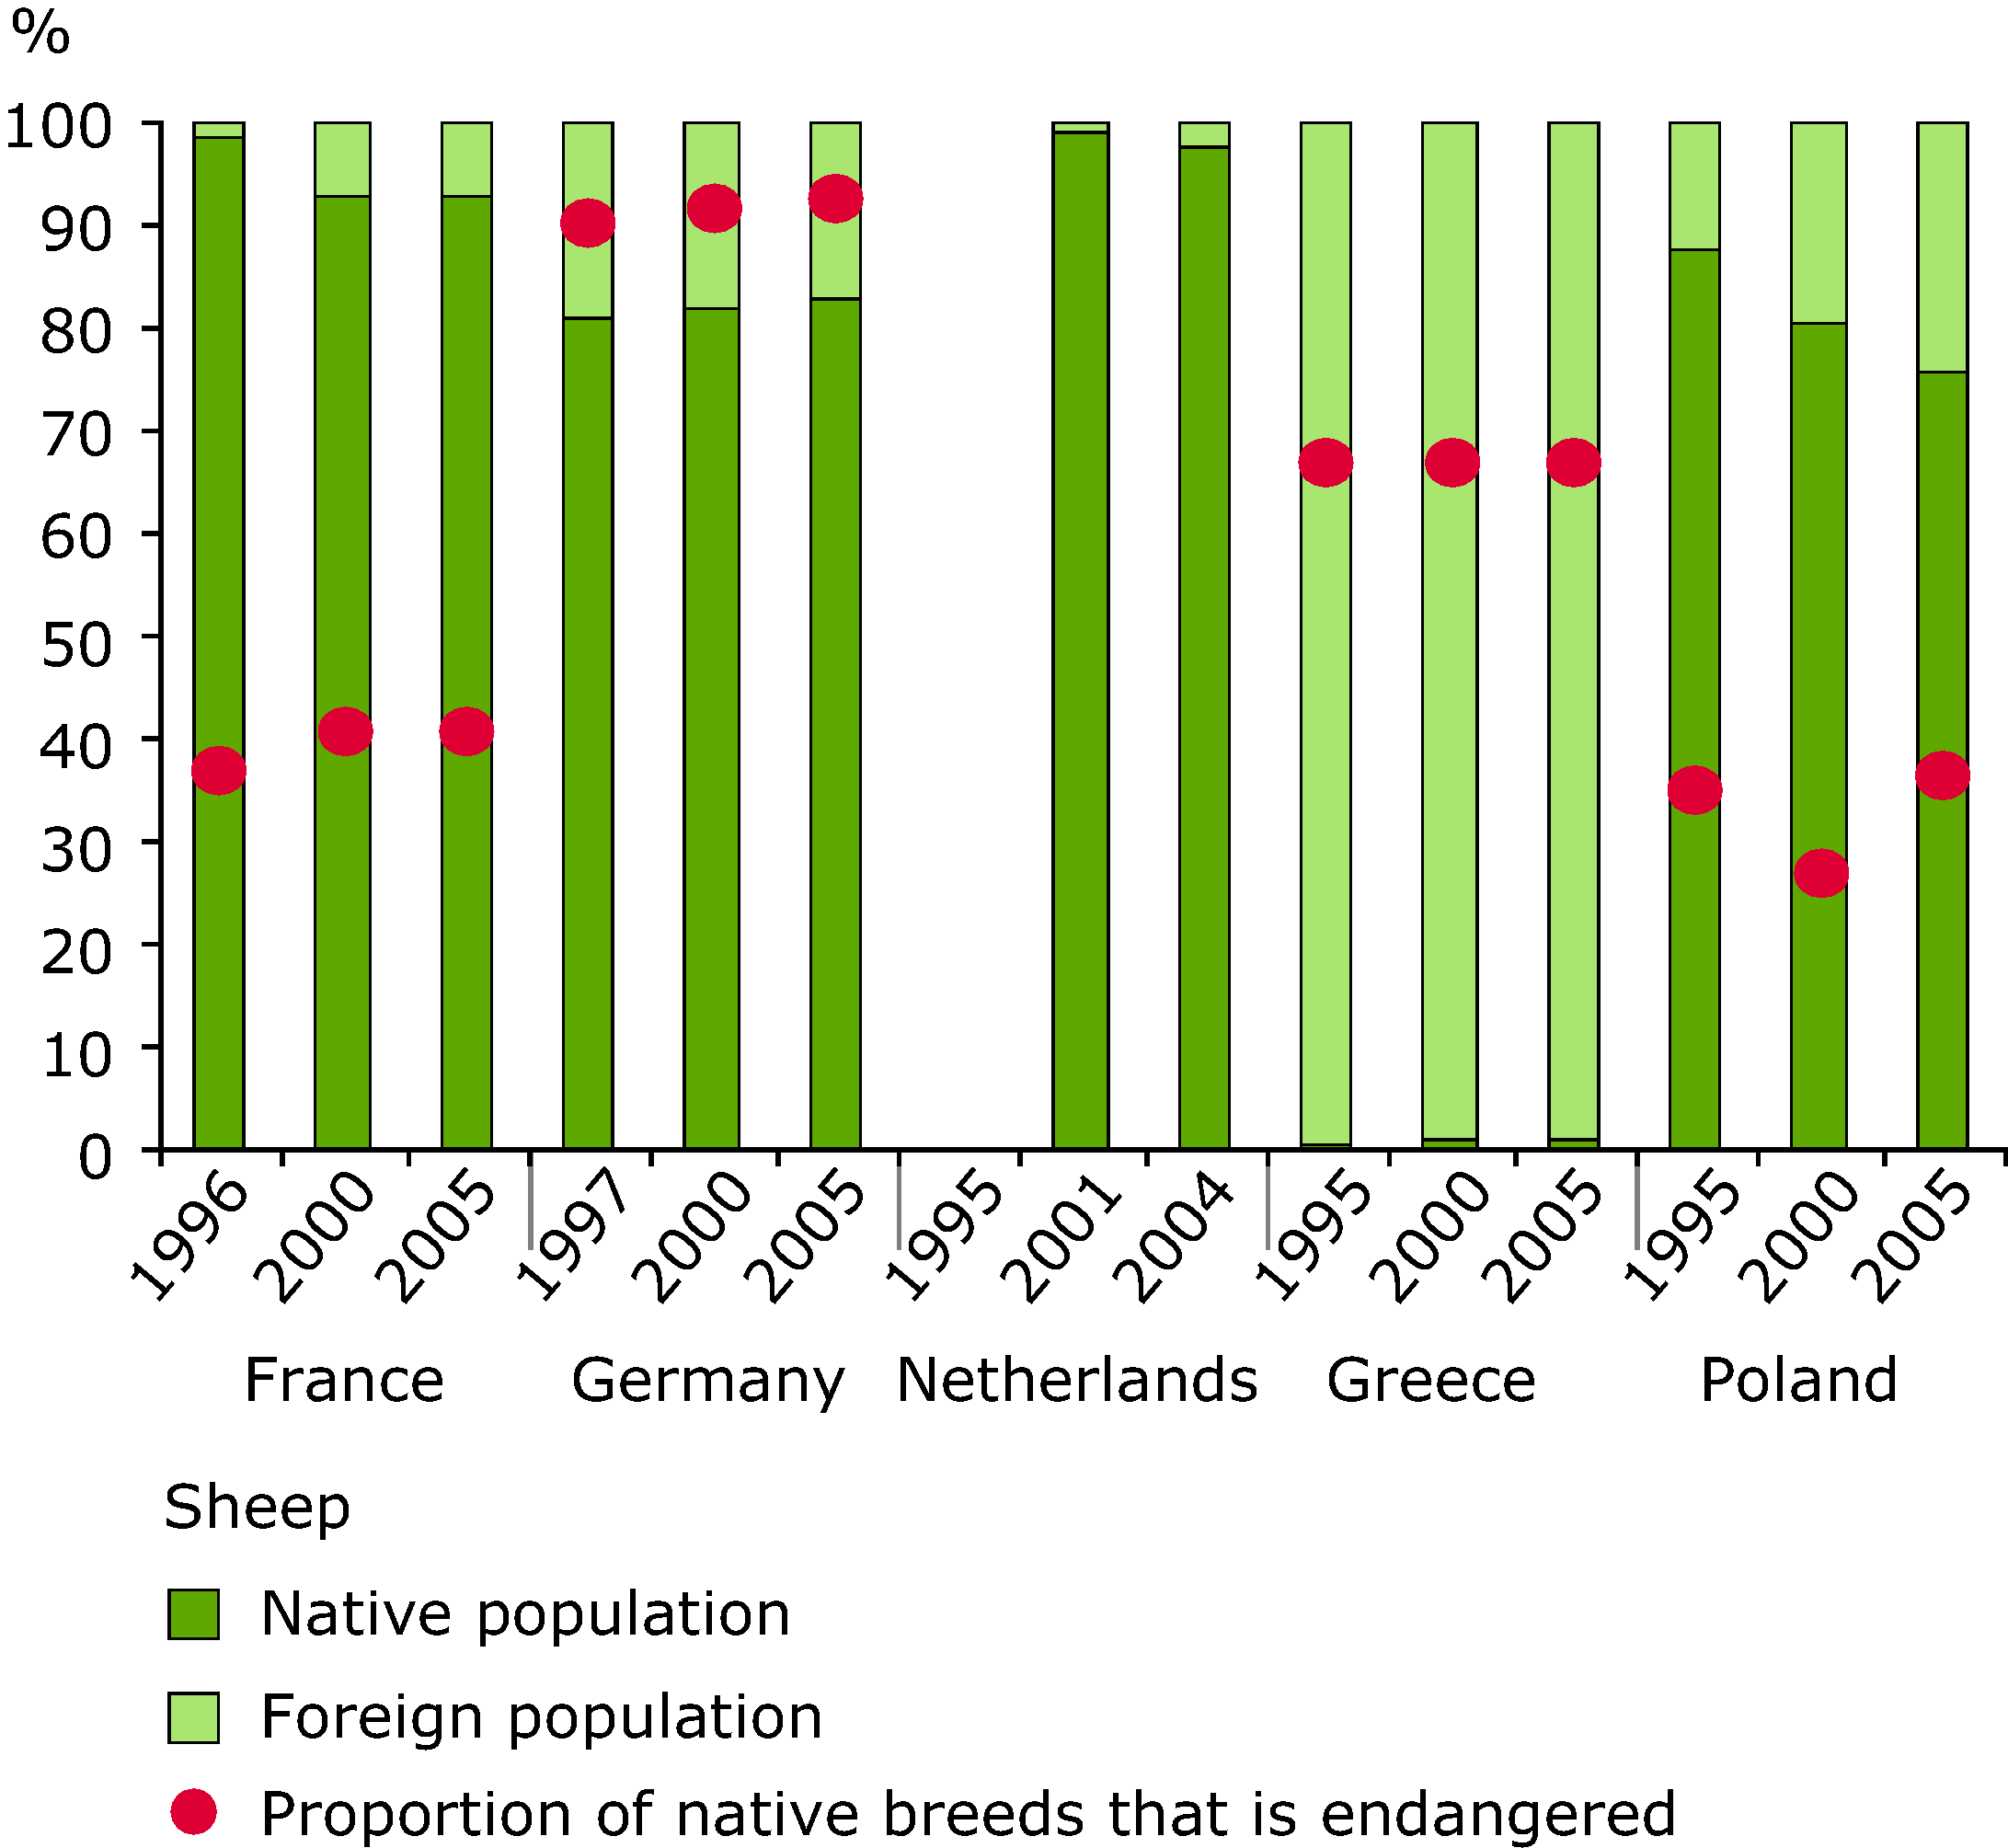 Evolution of native population sizes and endangered breeds in selected European countries (sheep)